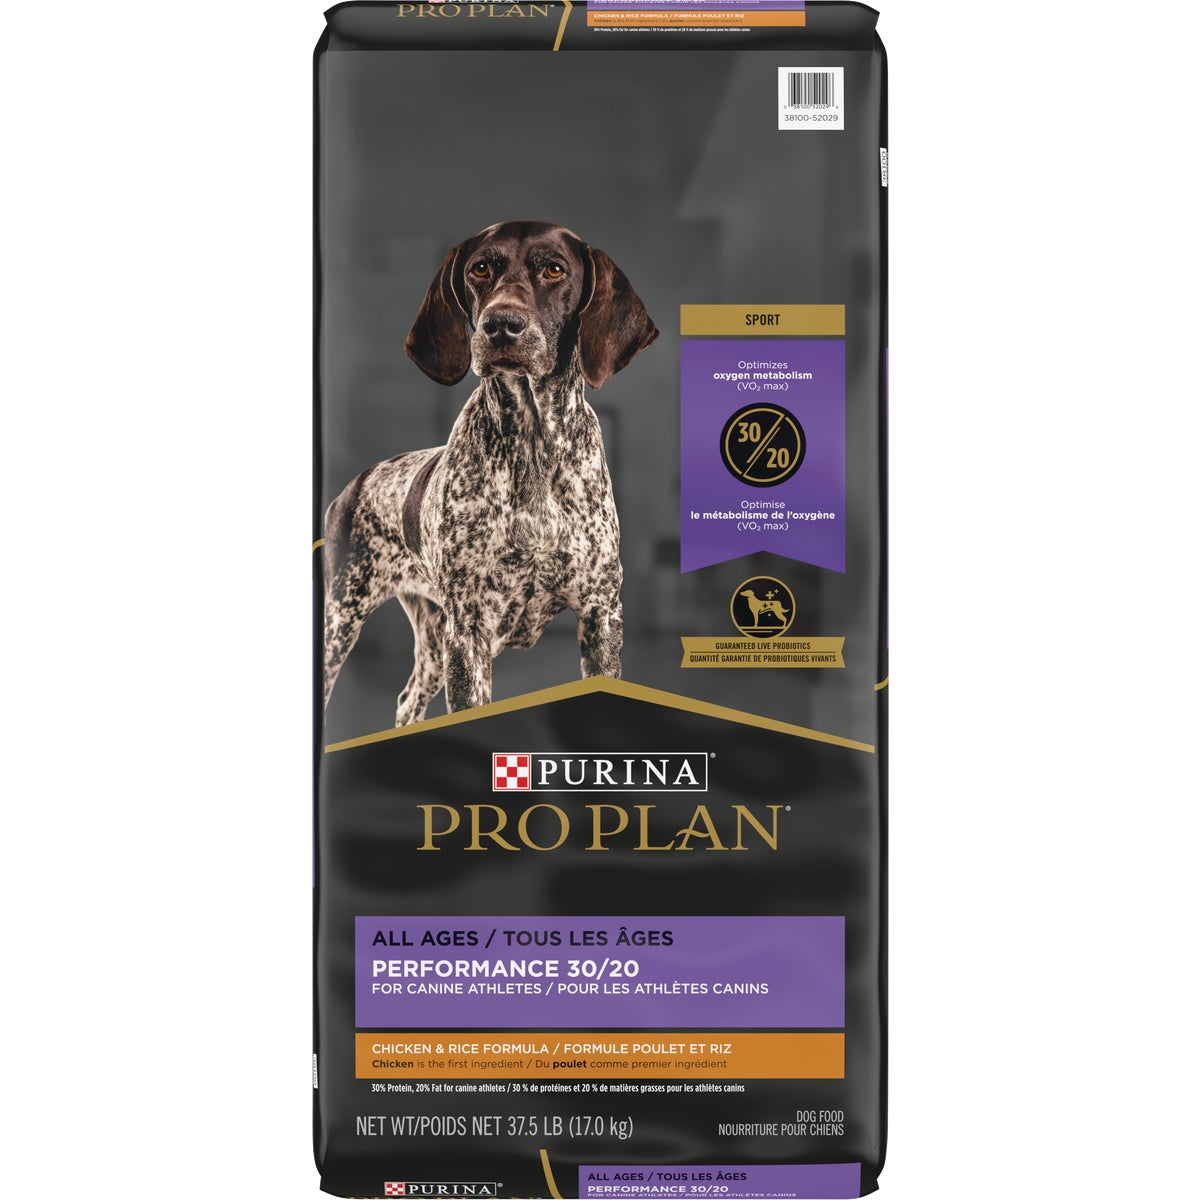 Purina Pro Plan Sport 37.5 Lb. Chicken Flavor All Ages Performance Dry Dog Food